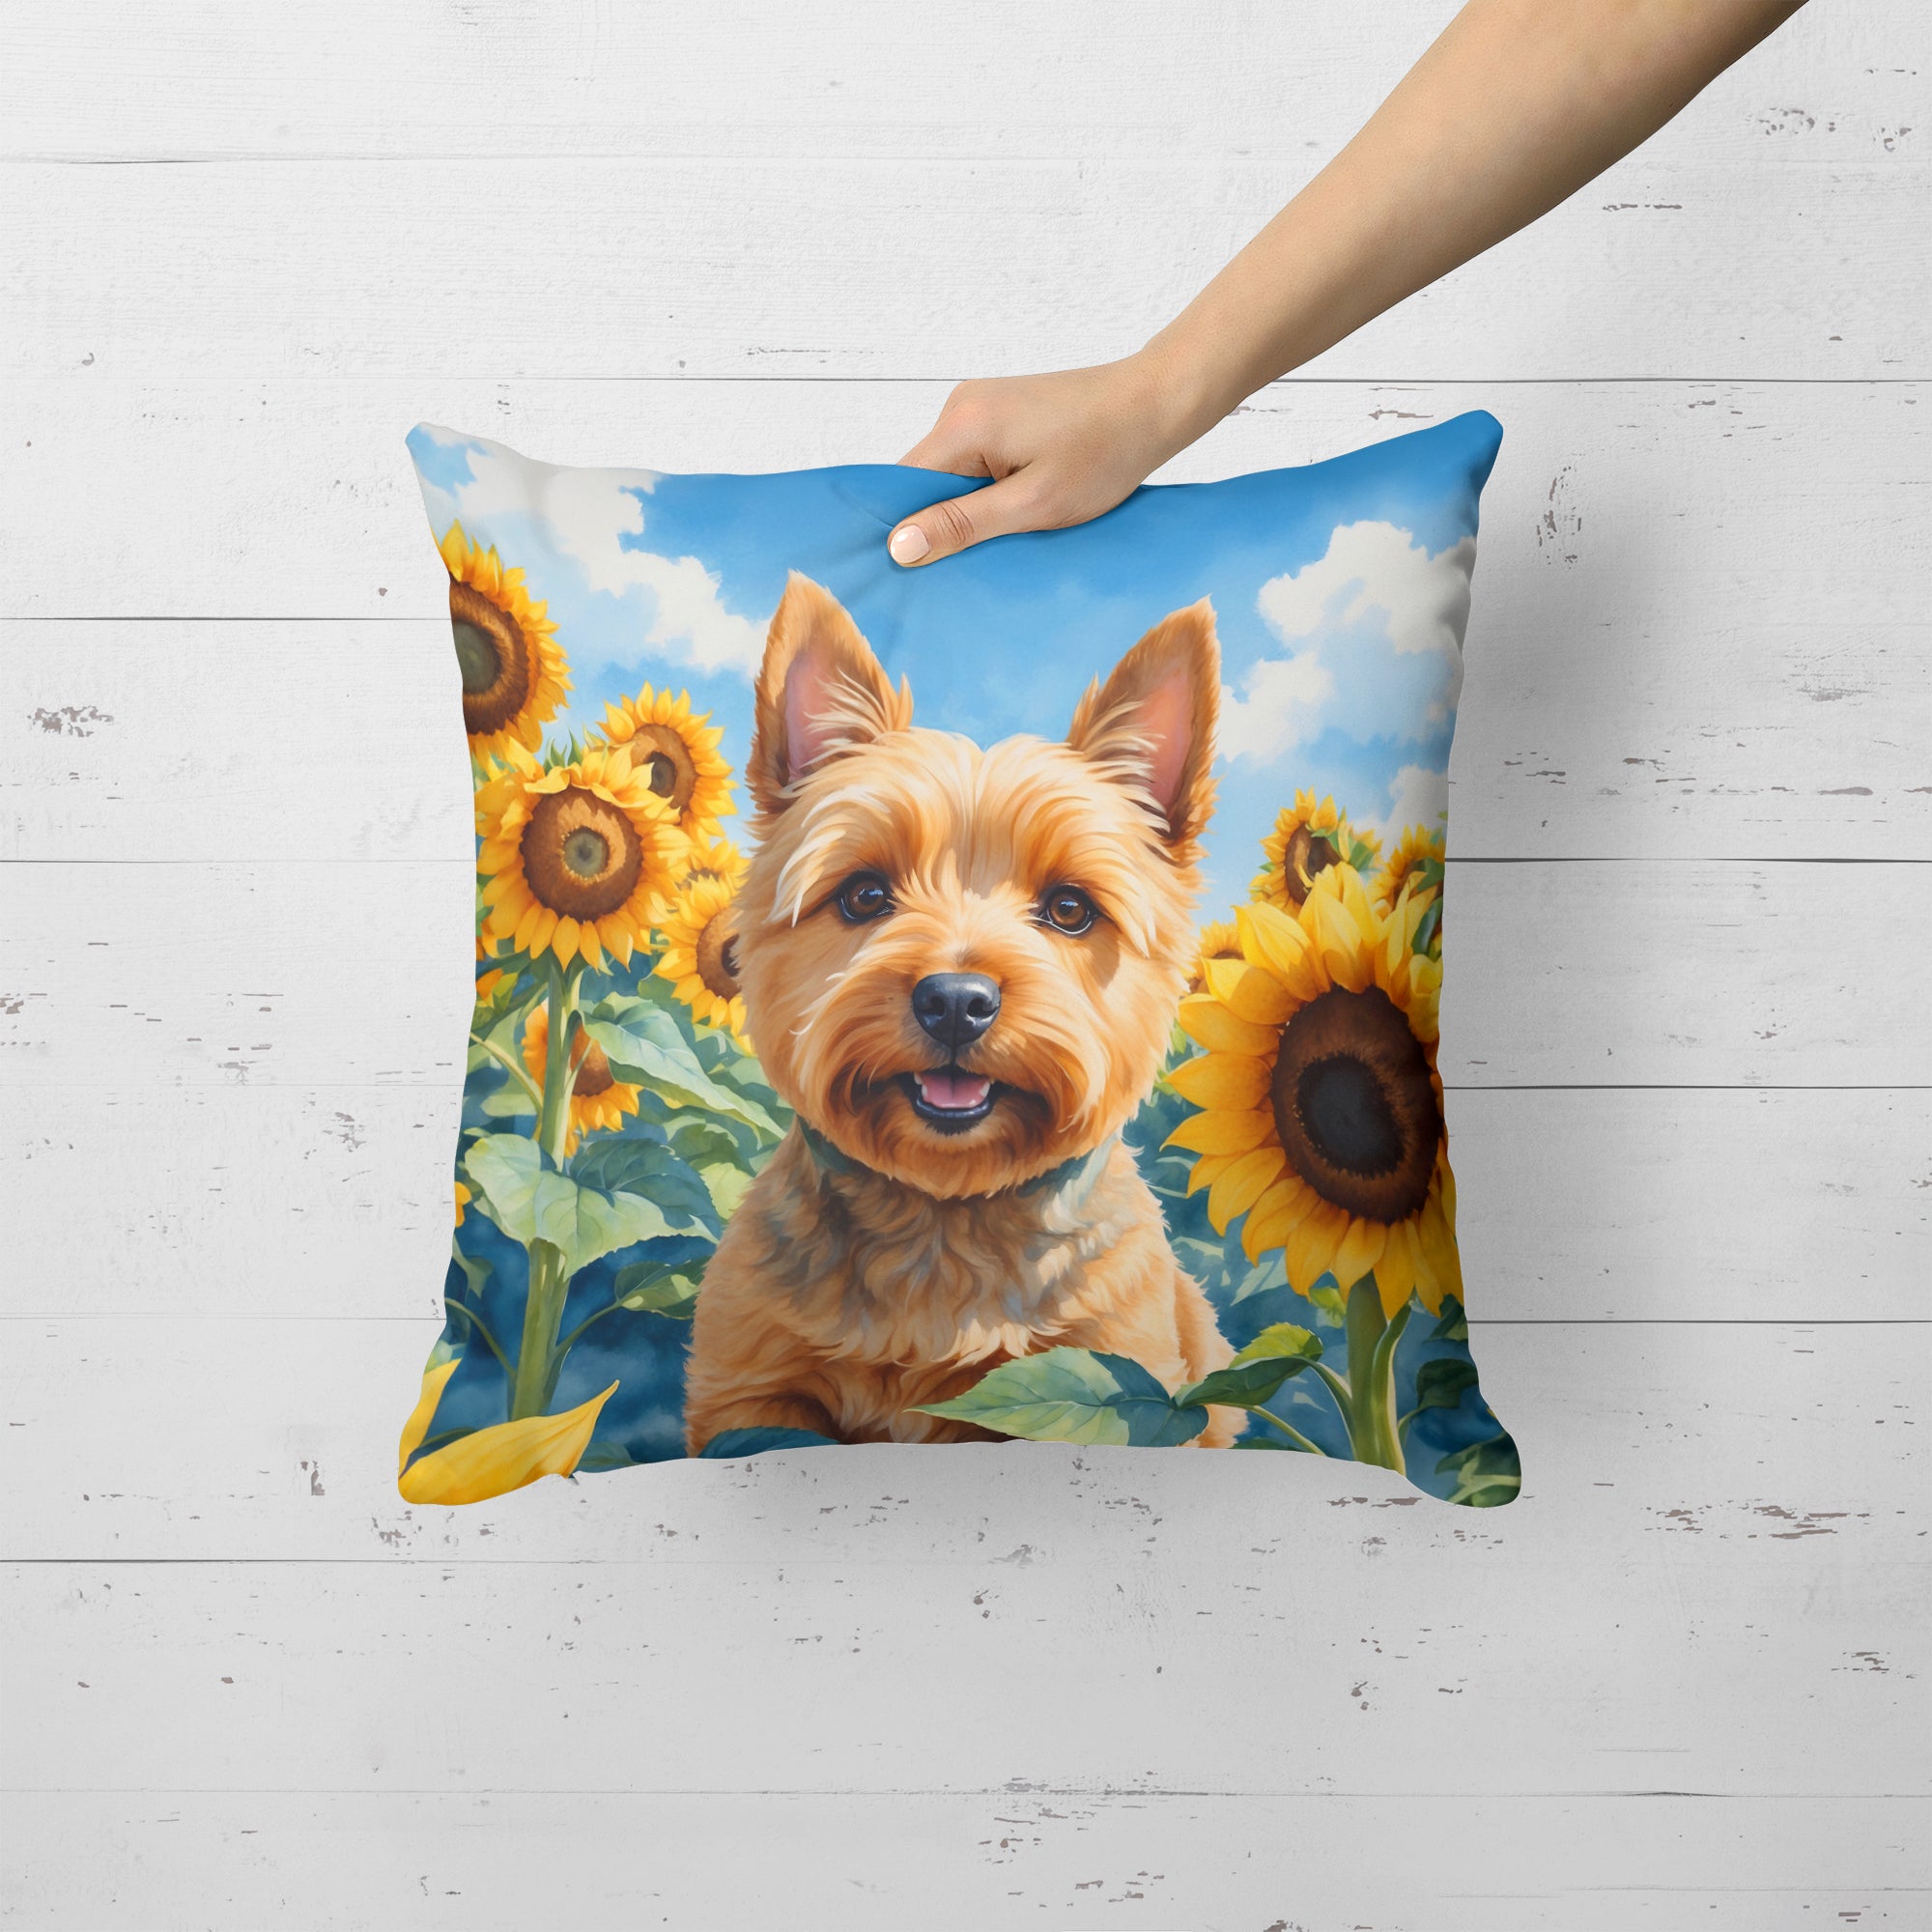 Buy this Norwich Terrier in Sunflowers Throw Pillow